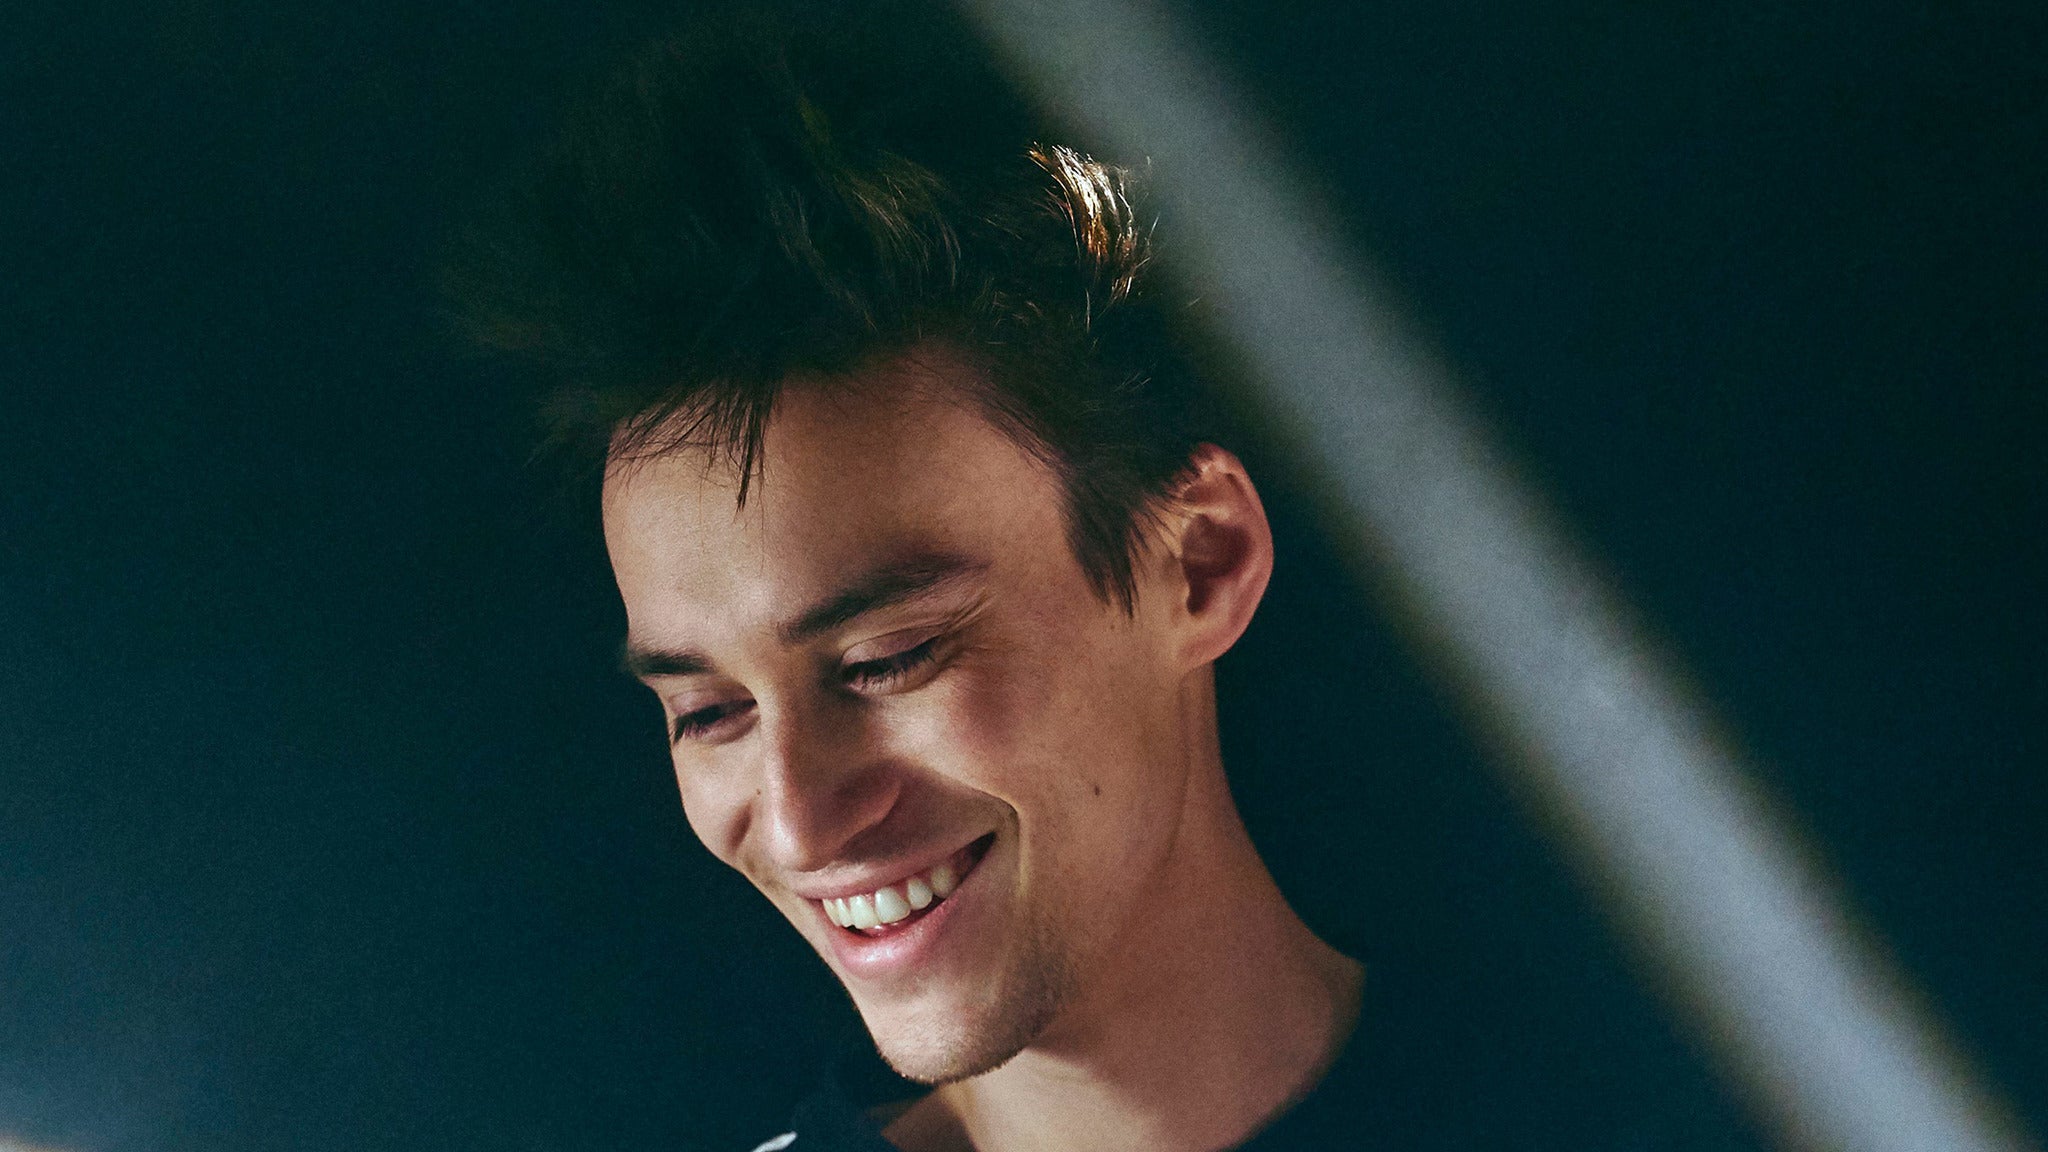 Jacob Collier - DJESSE World Tour Spring 2022 in Los Angeles promo photo for VIP Package presale offer code